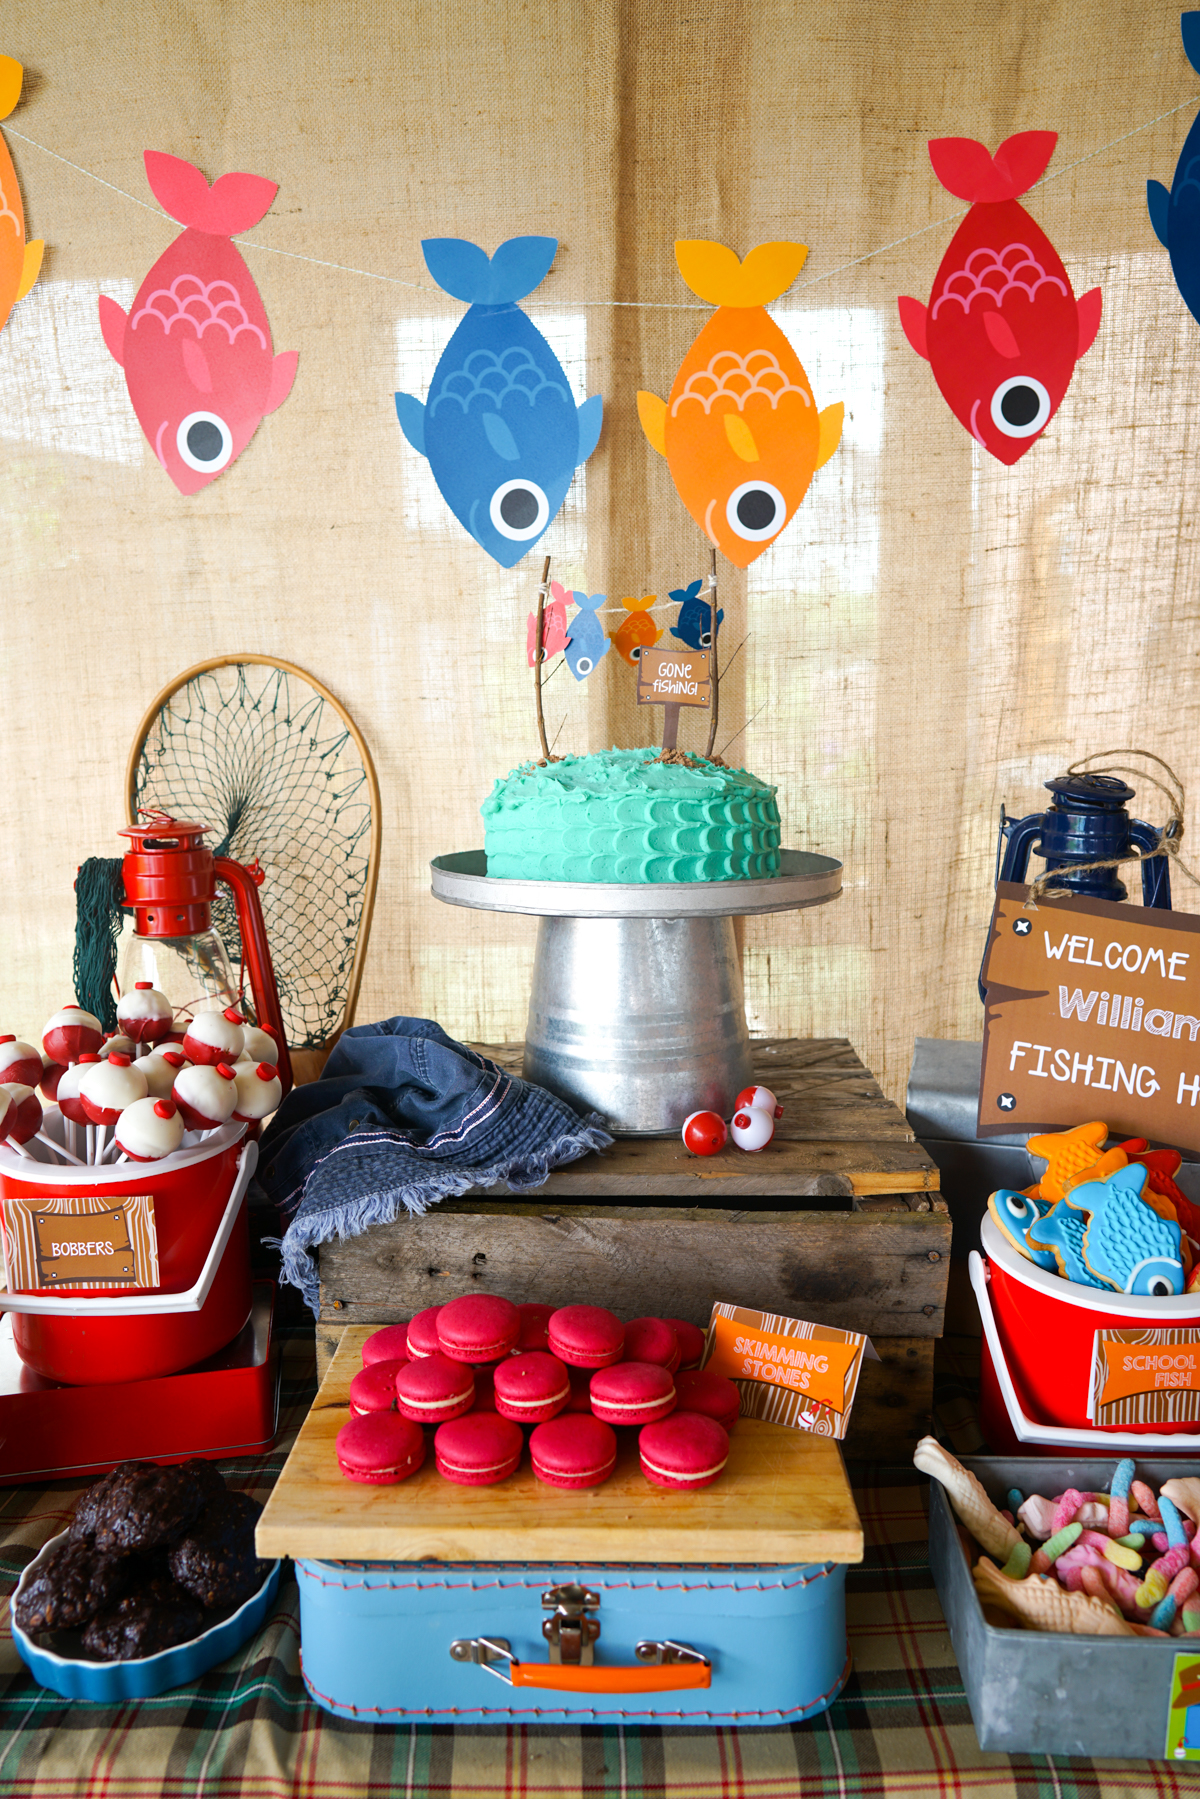 How to Decorations for a Fishing Themed Party - My Humble Home and Garden